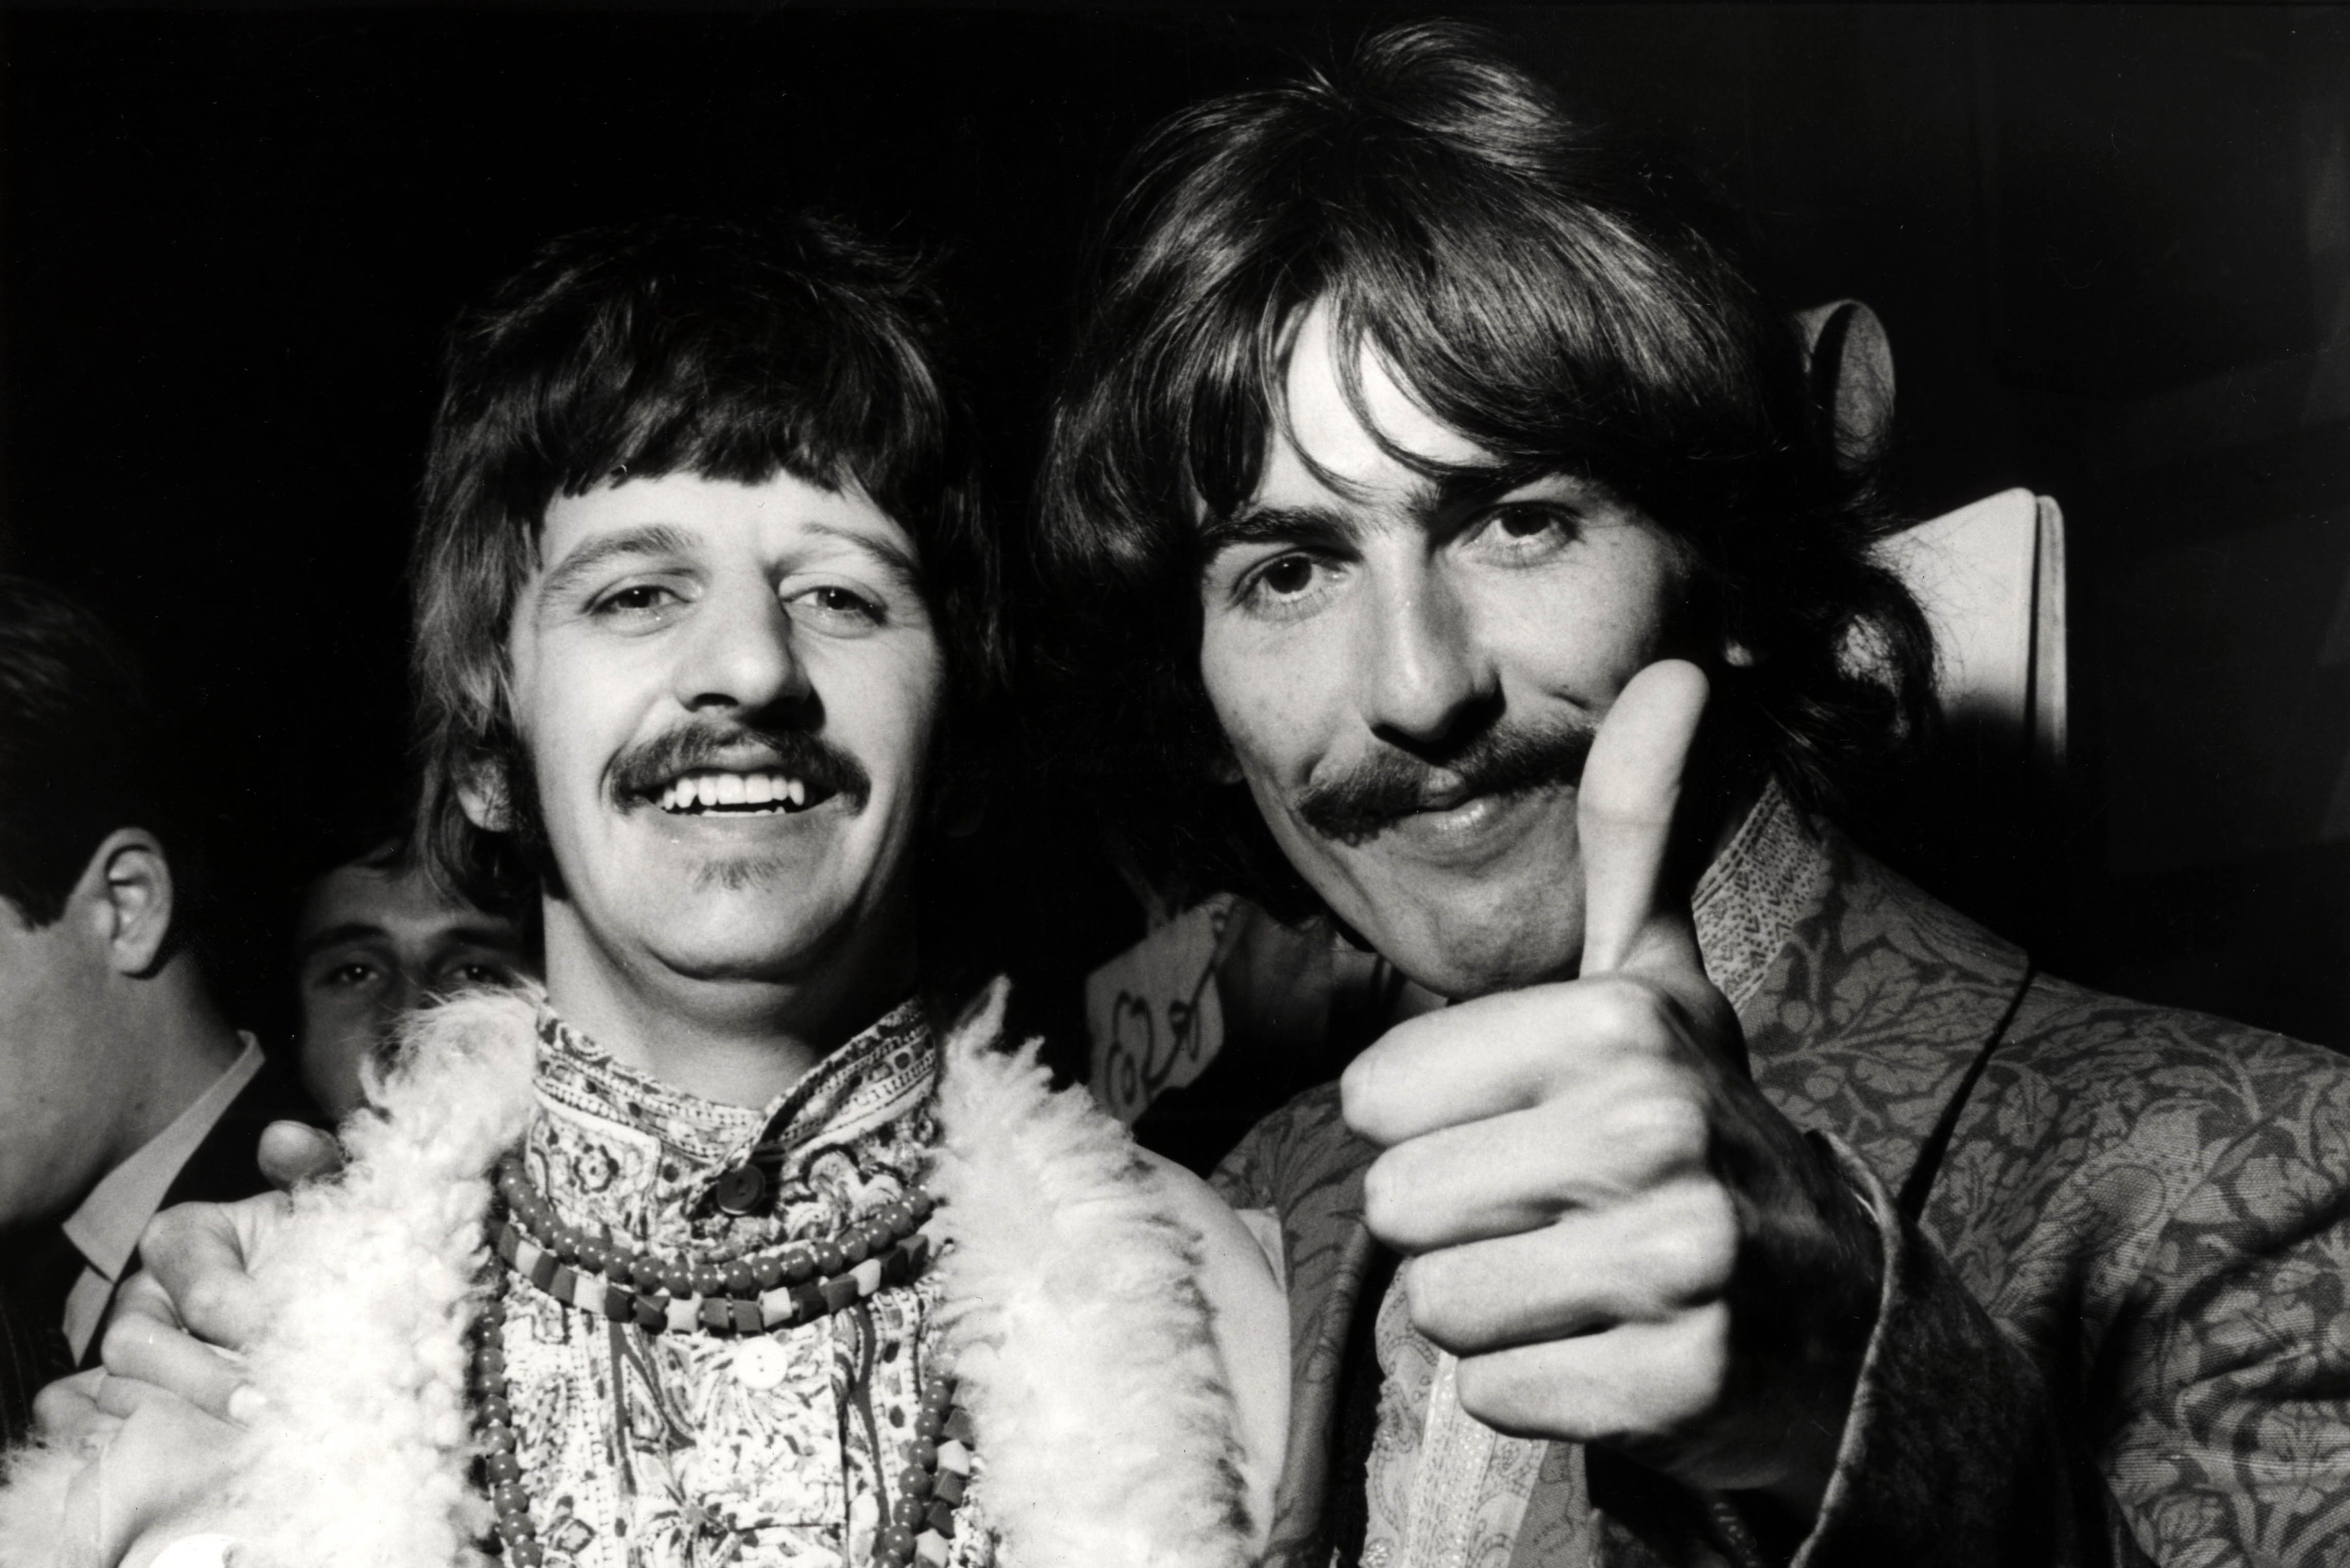 Ringo Starr and George Harrison posed at the "All You Need Is Love" session. A newly found recording from the 60s featuring the two Beatles members was just uncovered.